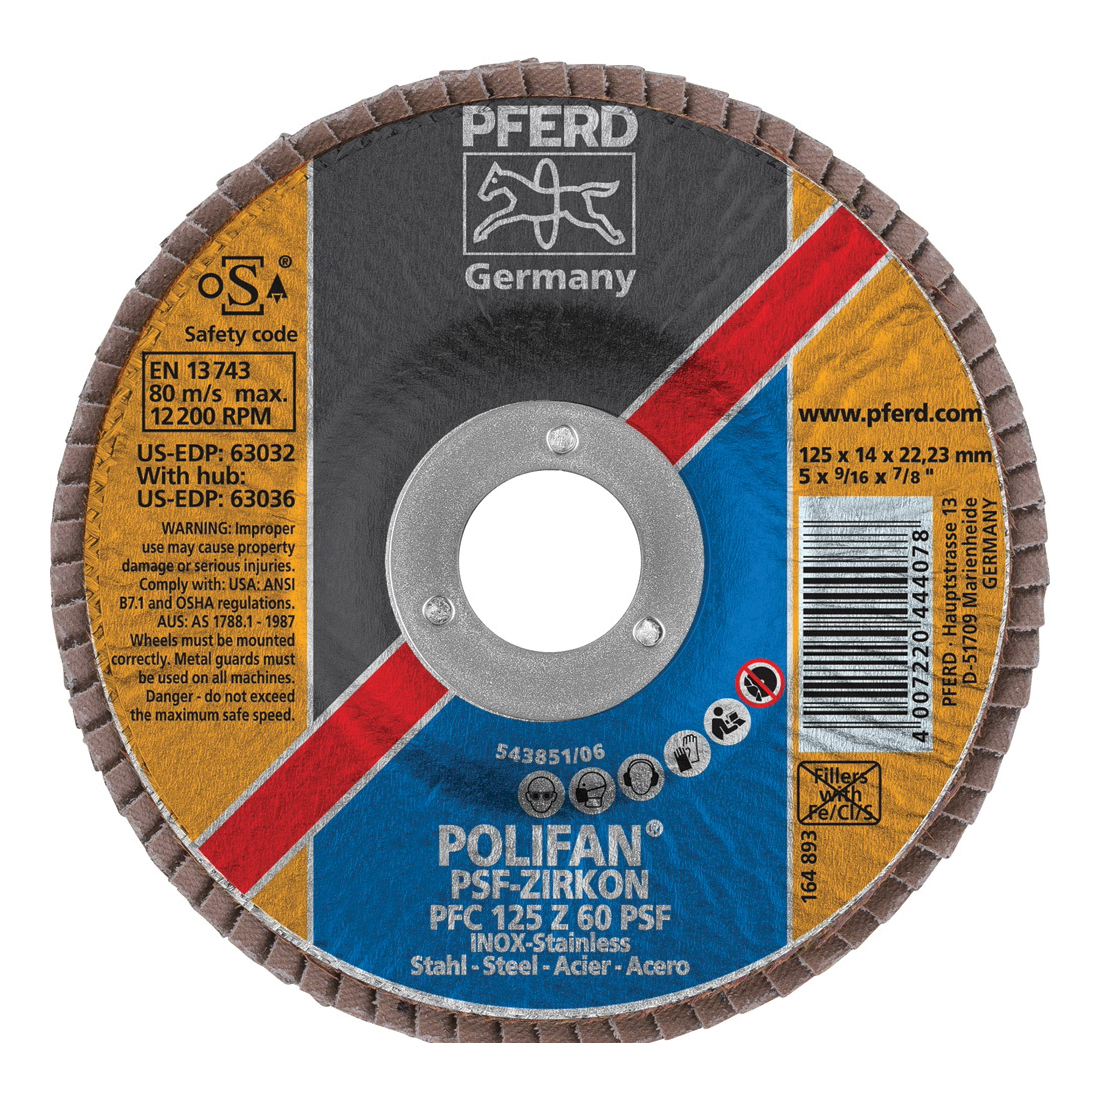 PFERD Polifan® 63032 Universal Line PSF-Z Unthreaded Coated Abrasive Flap Disc, 5 in Dia, 7/8 in Center Hole, 60 Grit, Zirconia Alumina Abrasive, Type 29 Conical Disc